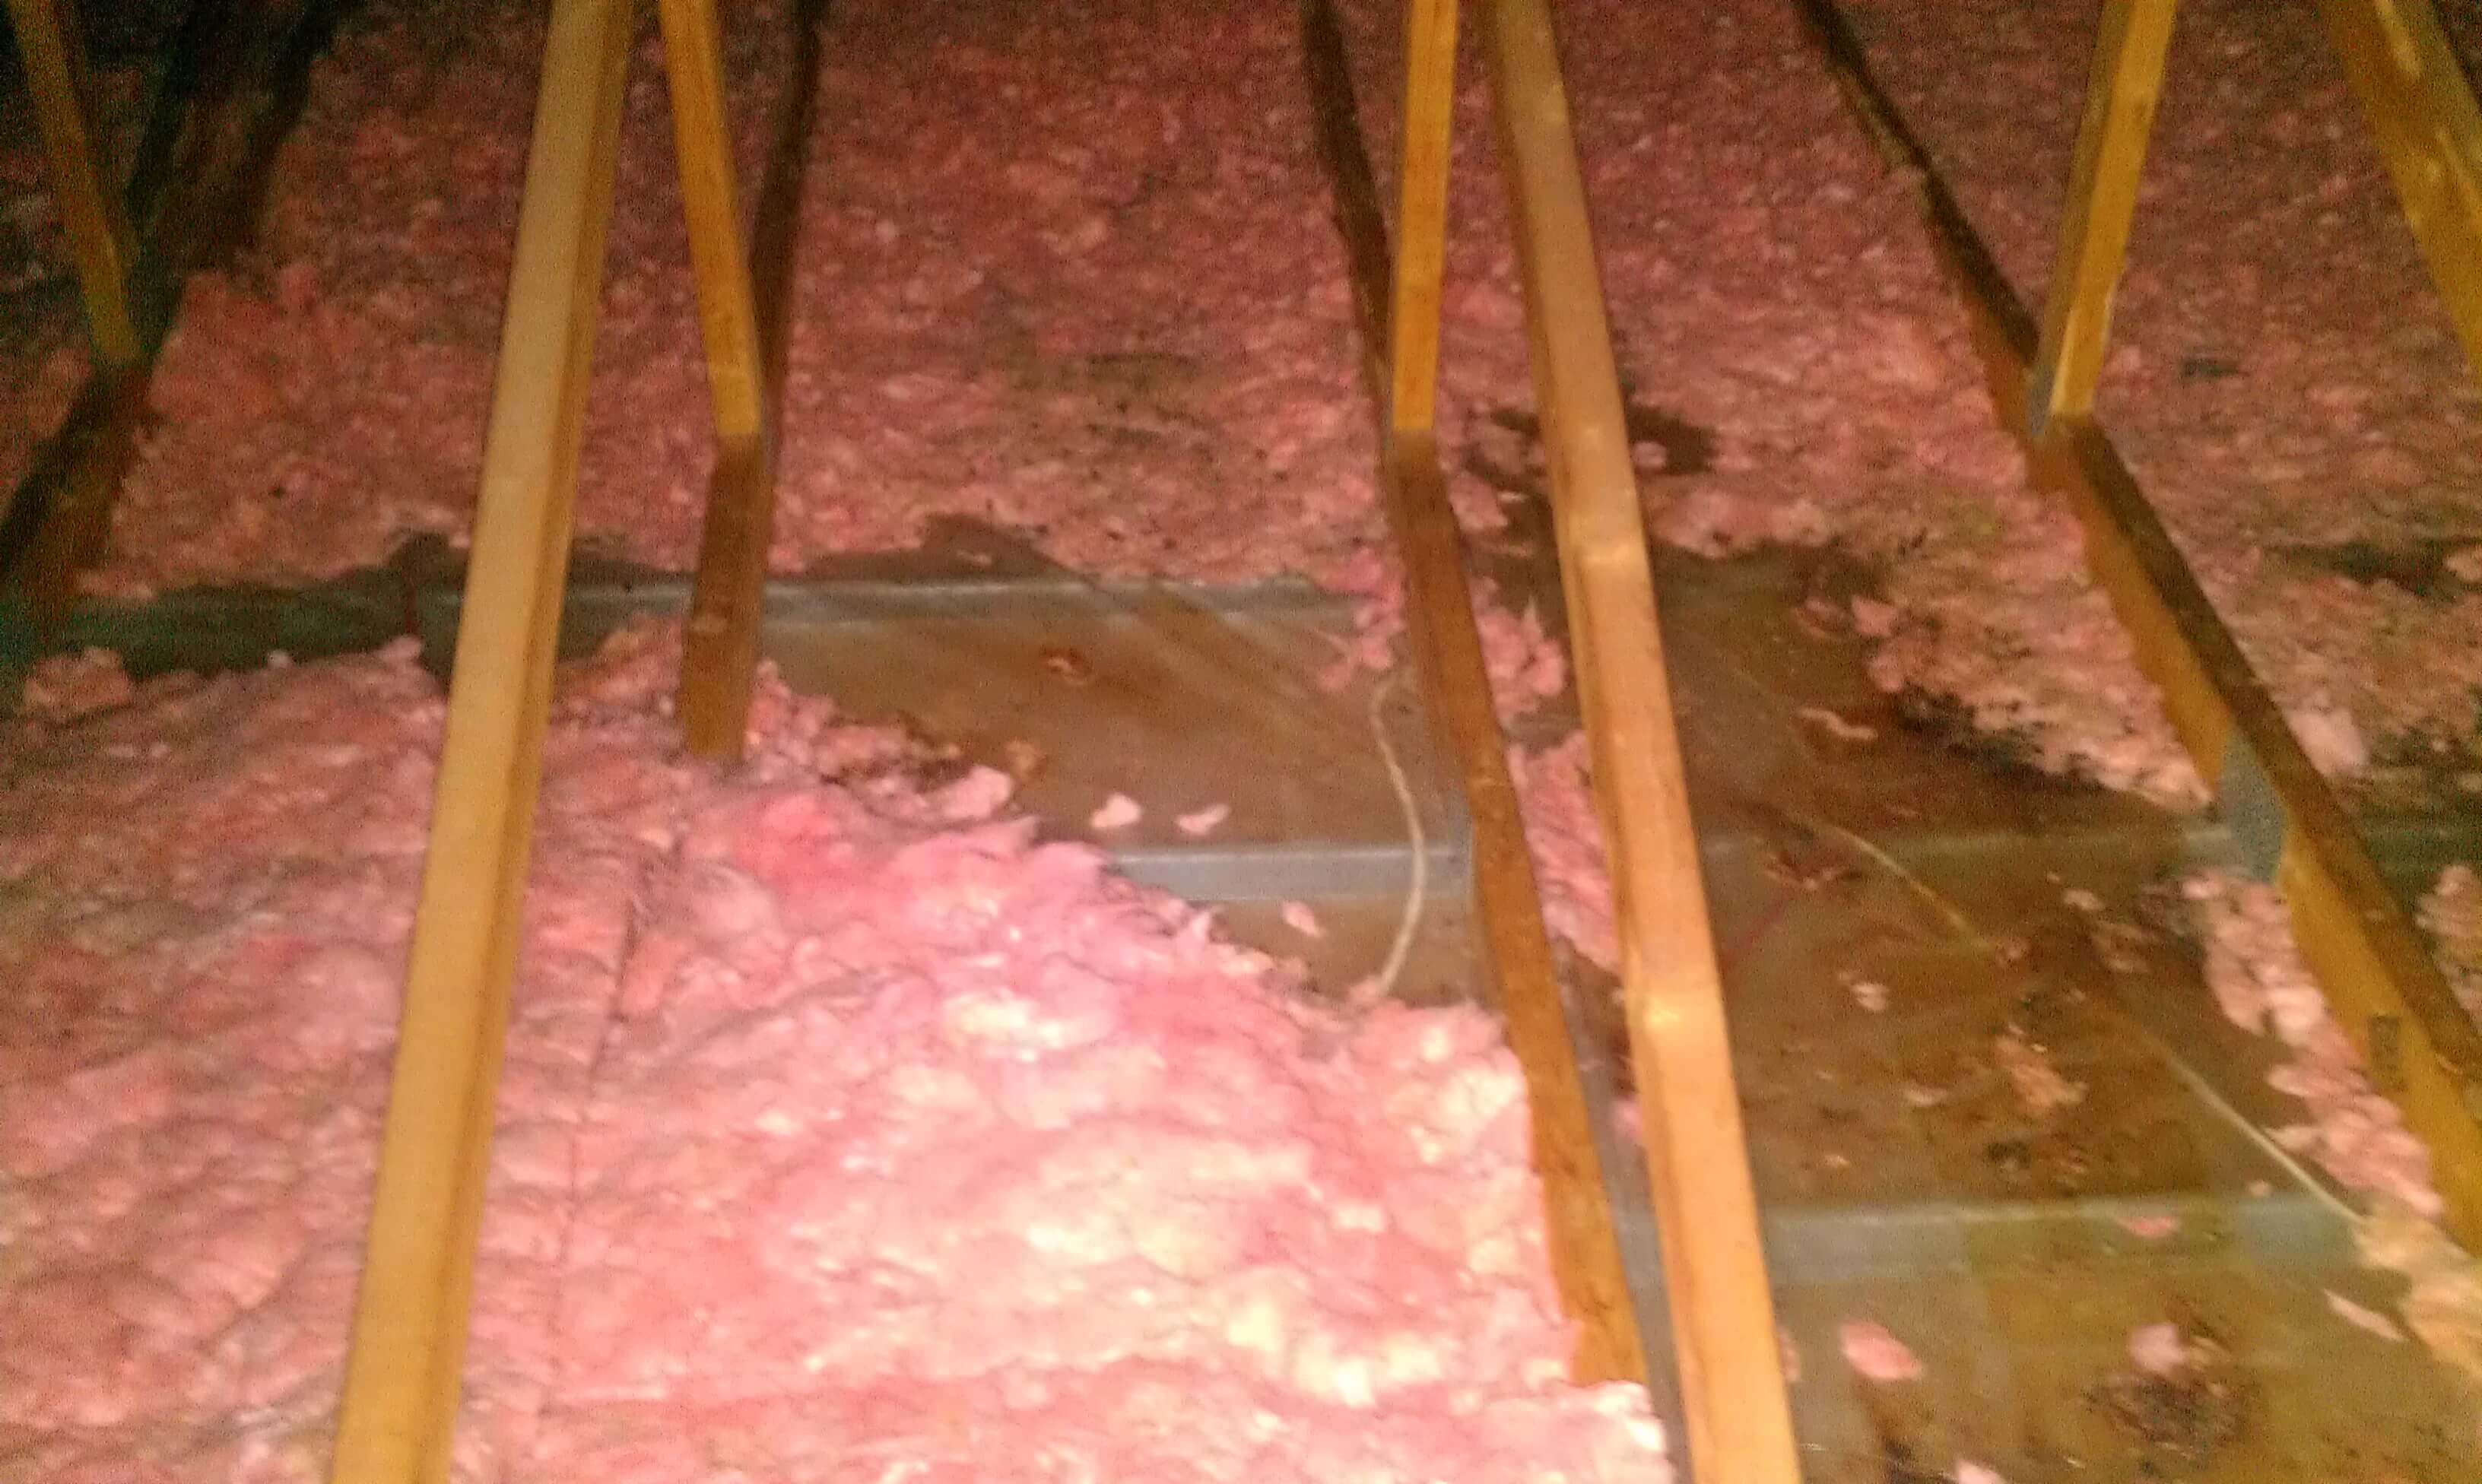 Inside attics, squirrels do tremendous amounts of damage to your insulation.